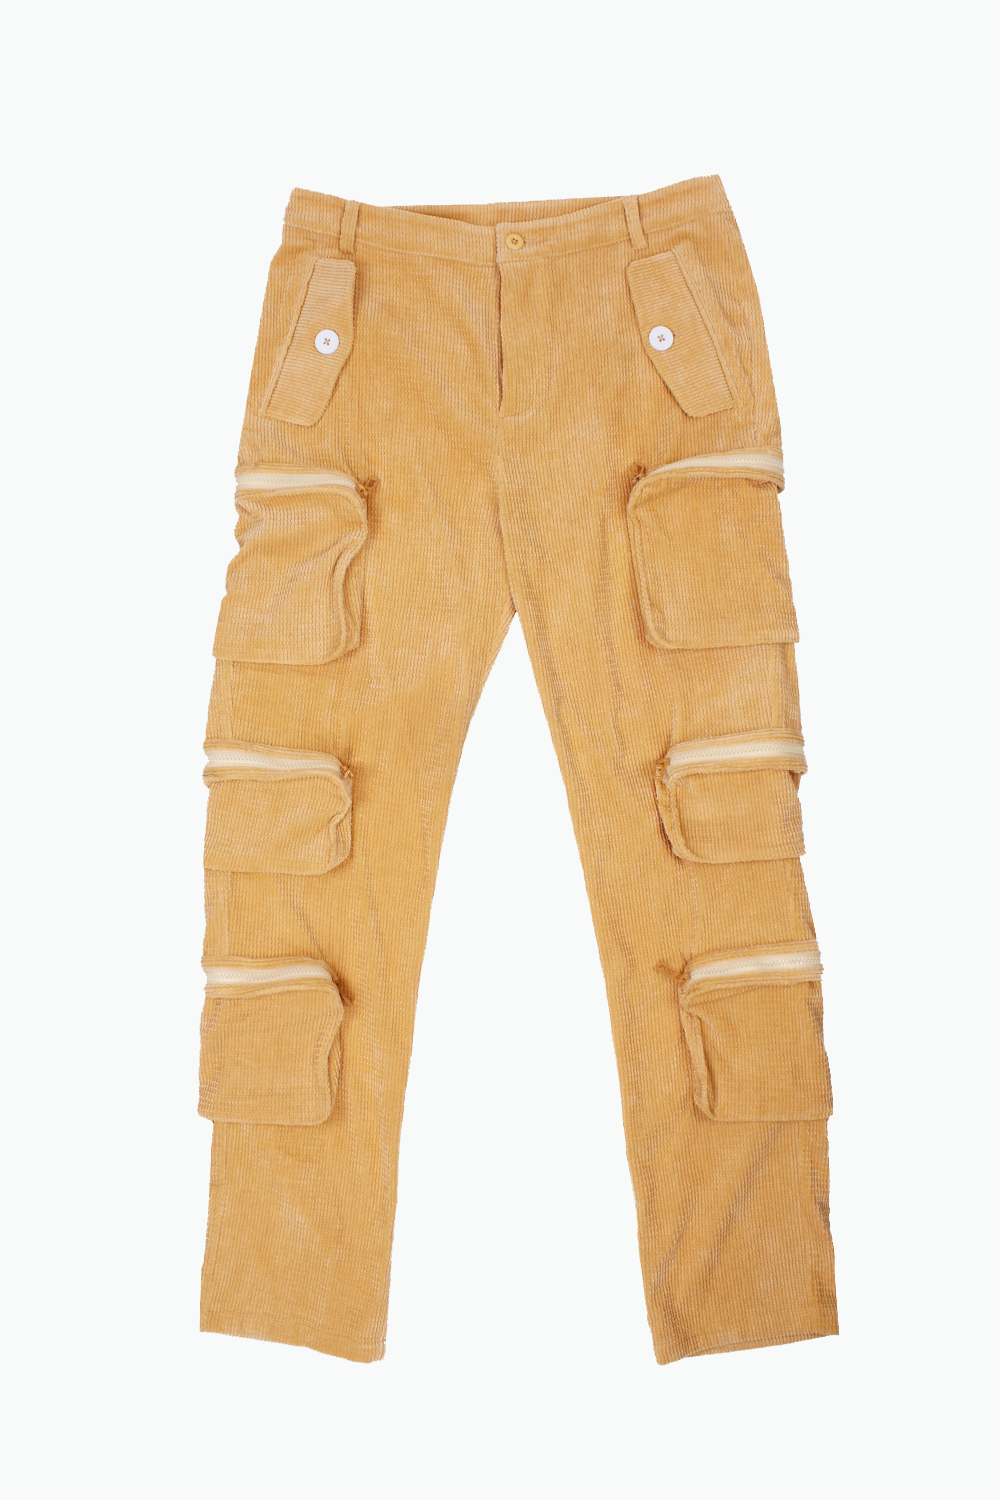 Sand Dunes Cargo Trousers